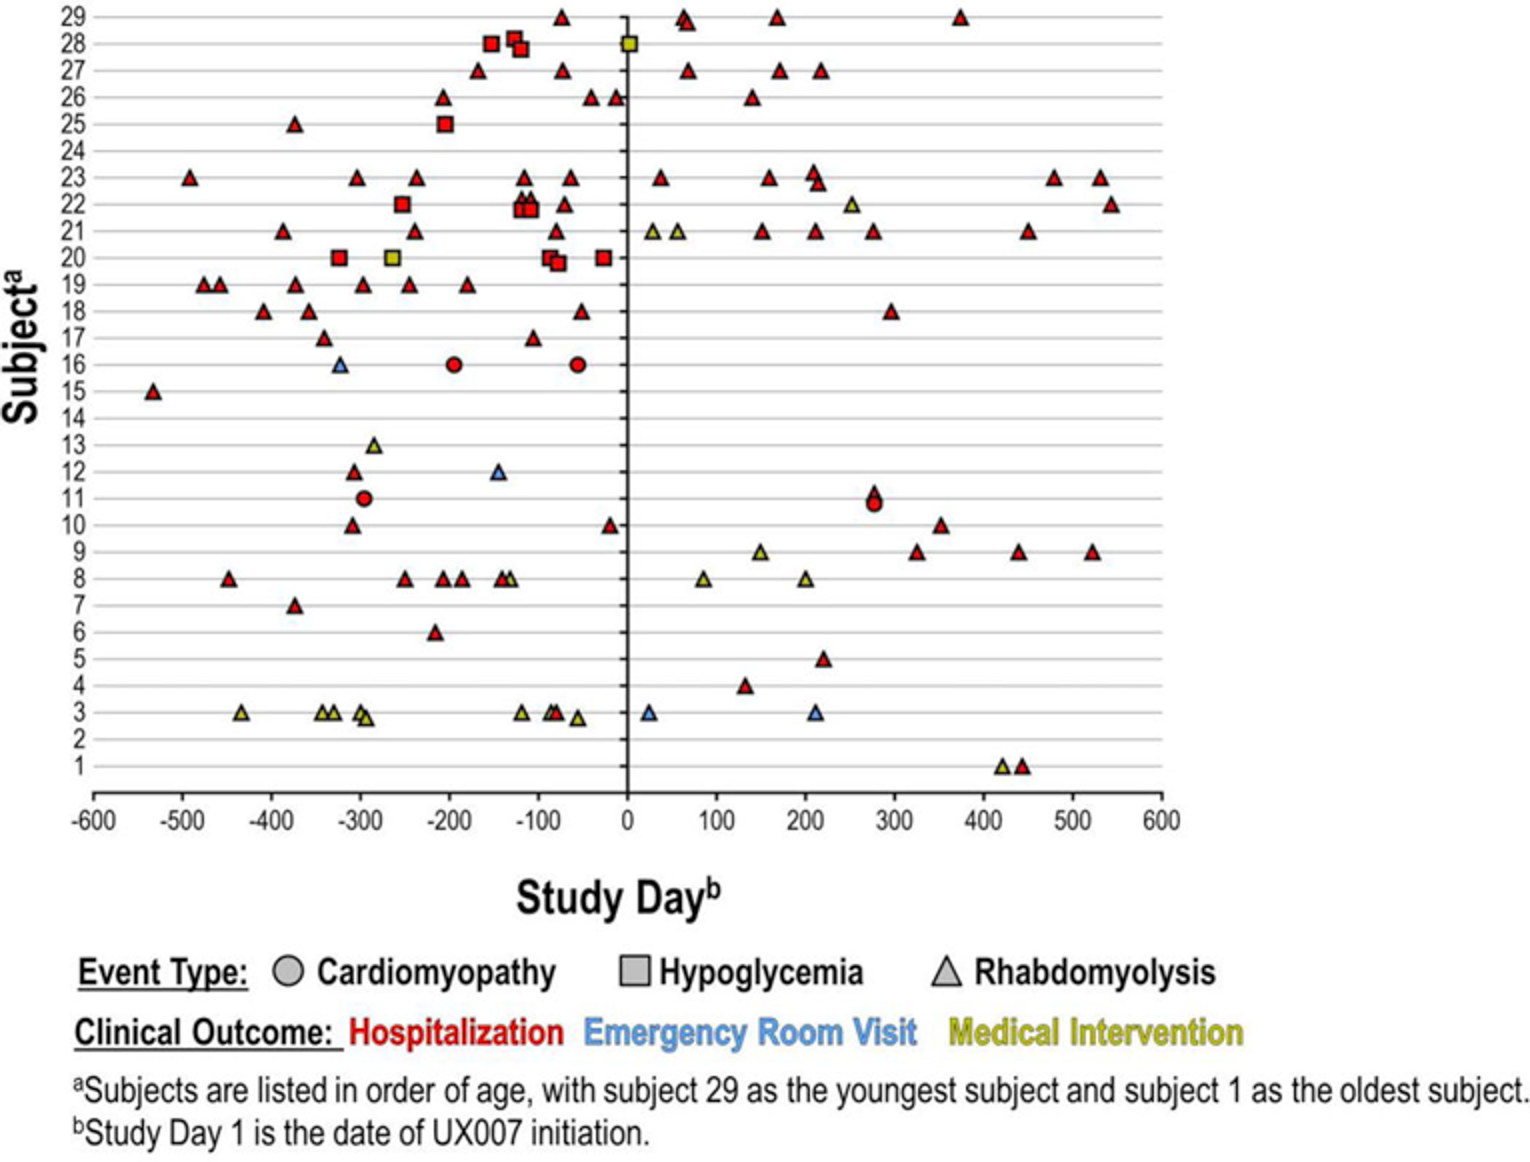 Scatterplot of major clinical events, including cardiomyopathy, hypoglycemia, and rhabdomyolysis. The X-axis is study day number ranging from 600 days before triheptanoin initiation to 600 days after; the Y-axis is subject number from 1 to 29 ranked in order of age from oldest to youngest. Each event included 3 subtypes (outcomes): hospitalization, emergency room visit, and medical intervention.